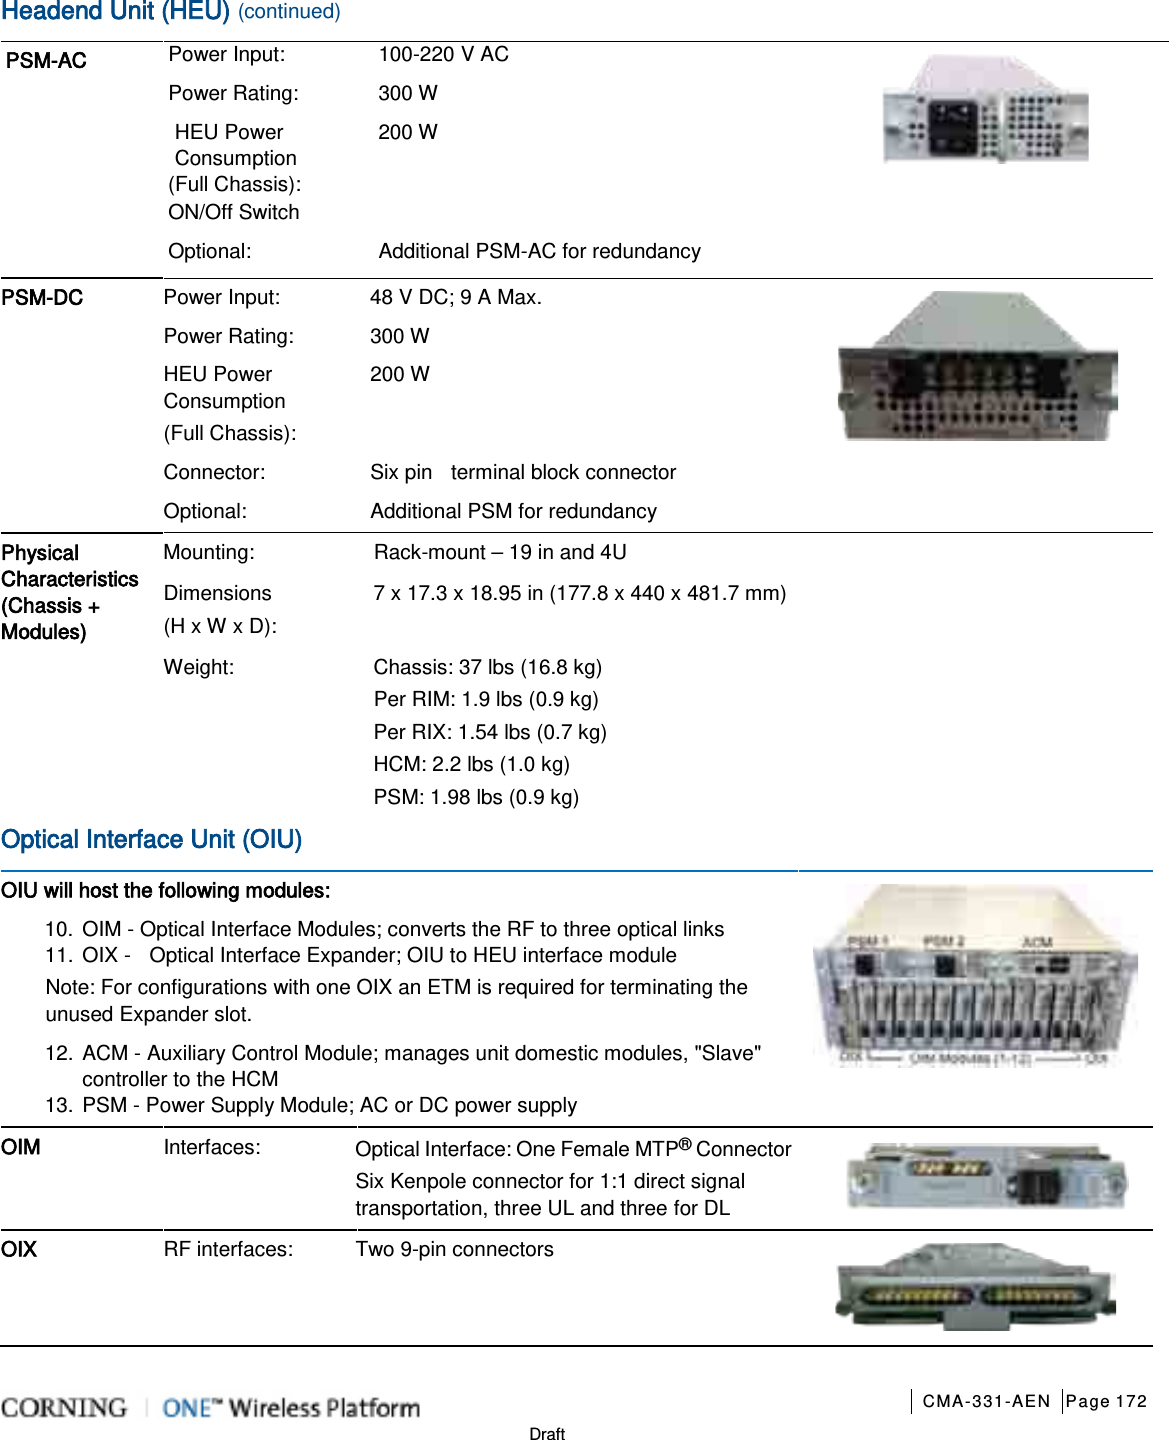       CMA-331-AEN Page 172  Draft Headend Unit (HEU) (continued) PSM-AC  Power Input: 100-220 V AC  Power Rating: 300 W HEU Power Consumption   (Full Chassis): 200 W ON/Off Switch  Optional: Additional PSM-AC for redundancy PSM-DC  Power Input: 48 V DC; 9 A Max.  Power Rating: 300 W HEU Power Consumption   (Full Chassis): 200 W Connector: Six pin    terminal block connector Optional: Additional PSM for redundancy     Physical Characteristics (Chassis + Modules)  Mounting: Rack-mount – 19 in and 4U Dimensions   (H x W x D): 7 x 17.3 x 18.95 in (177.8 x 440 x 481.7 mm) Weight:  Chassis: 37 lbs (16.8 kg) Per RIM: 1.9 lbs (0.9 kg) Per RIX: 1.54 lbs (0.7 kg) HCM: 2.2 lbs (1.0 kg) PSM: 1.98 lbs (0.9 kg) Optical Interface Unit (OIU) OIU will host the following modules: 10. OIM - Optical Interface Modules; converts the RF to three optical links 11. OIX -  Optical Interface Expander; OIU to HEU interface module Note: For configurations with one OIX an ETM is required for terminating the unused Expander slot. 12. ACM - Auxiliary Control Module; manages unit domestic modules, &quot;Slave&quot; controller to the HCM 13. PSM - Power Supply Module; AC or DC power supply      OIM Interfaces: Optical Interface: One Female MTP® Connector Six Kenpole connector for 1:1 direct signal transportation, three UL and three for DL  OIX RF interfaces: Two 9-pin connectors     